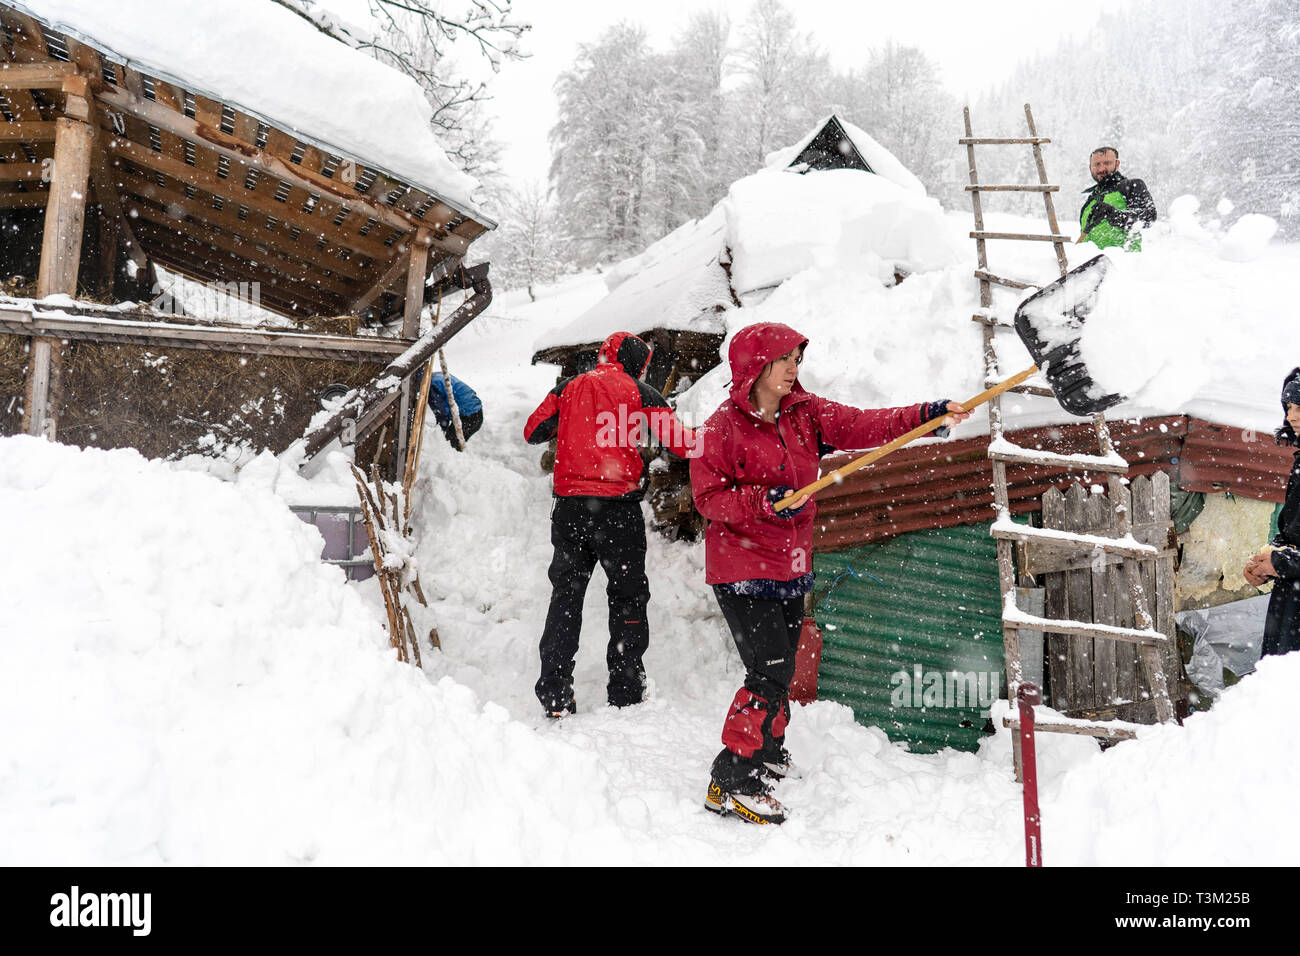 Hikers volunteered to help shoveling the snow at a isolated monastery located on the main trail at 1400m altitude in Retezat National Park, Romania, Stock Photo